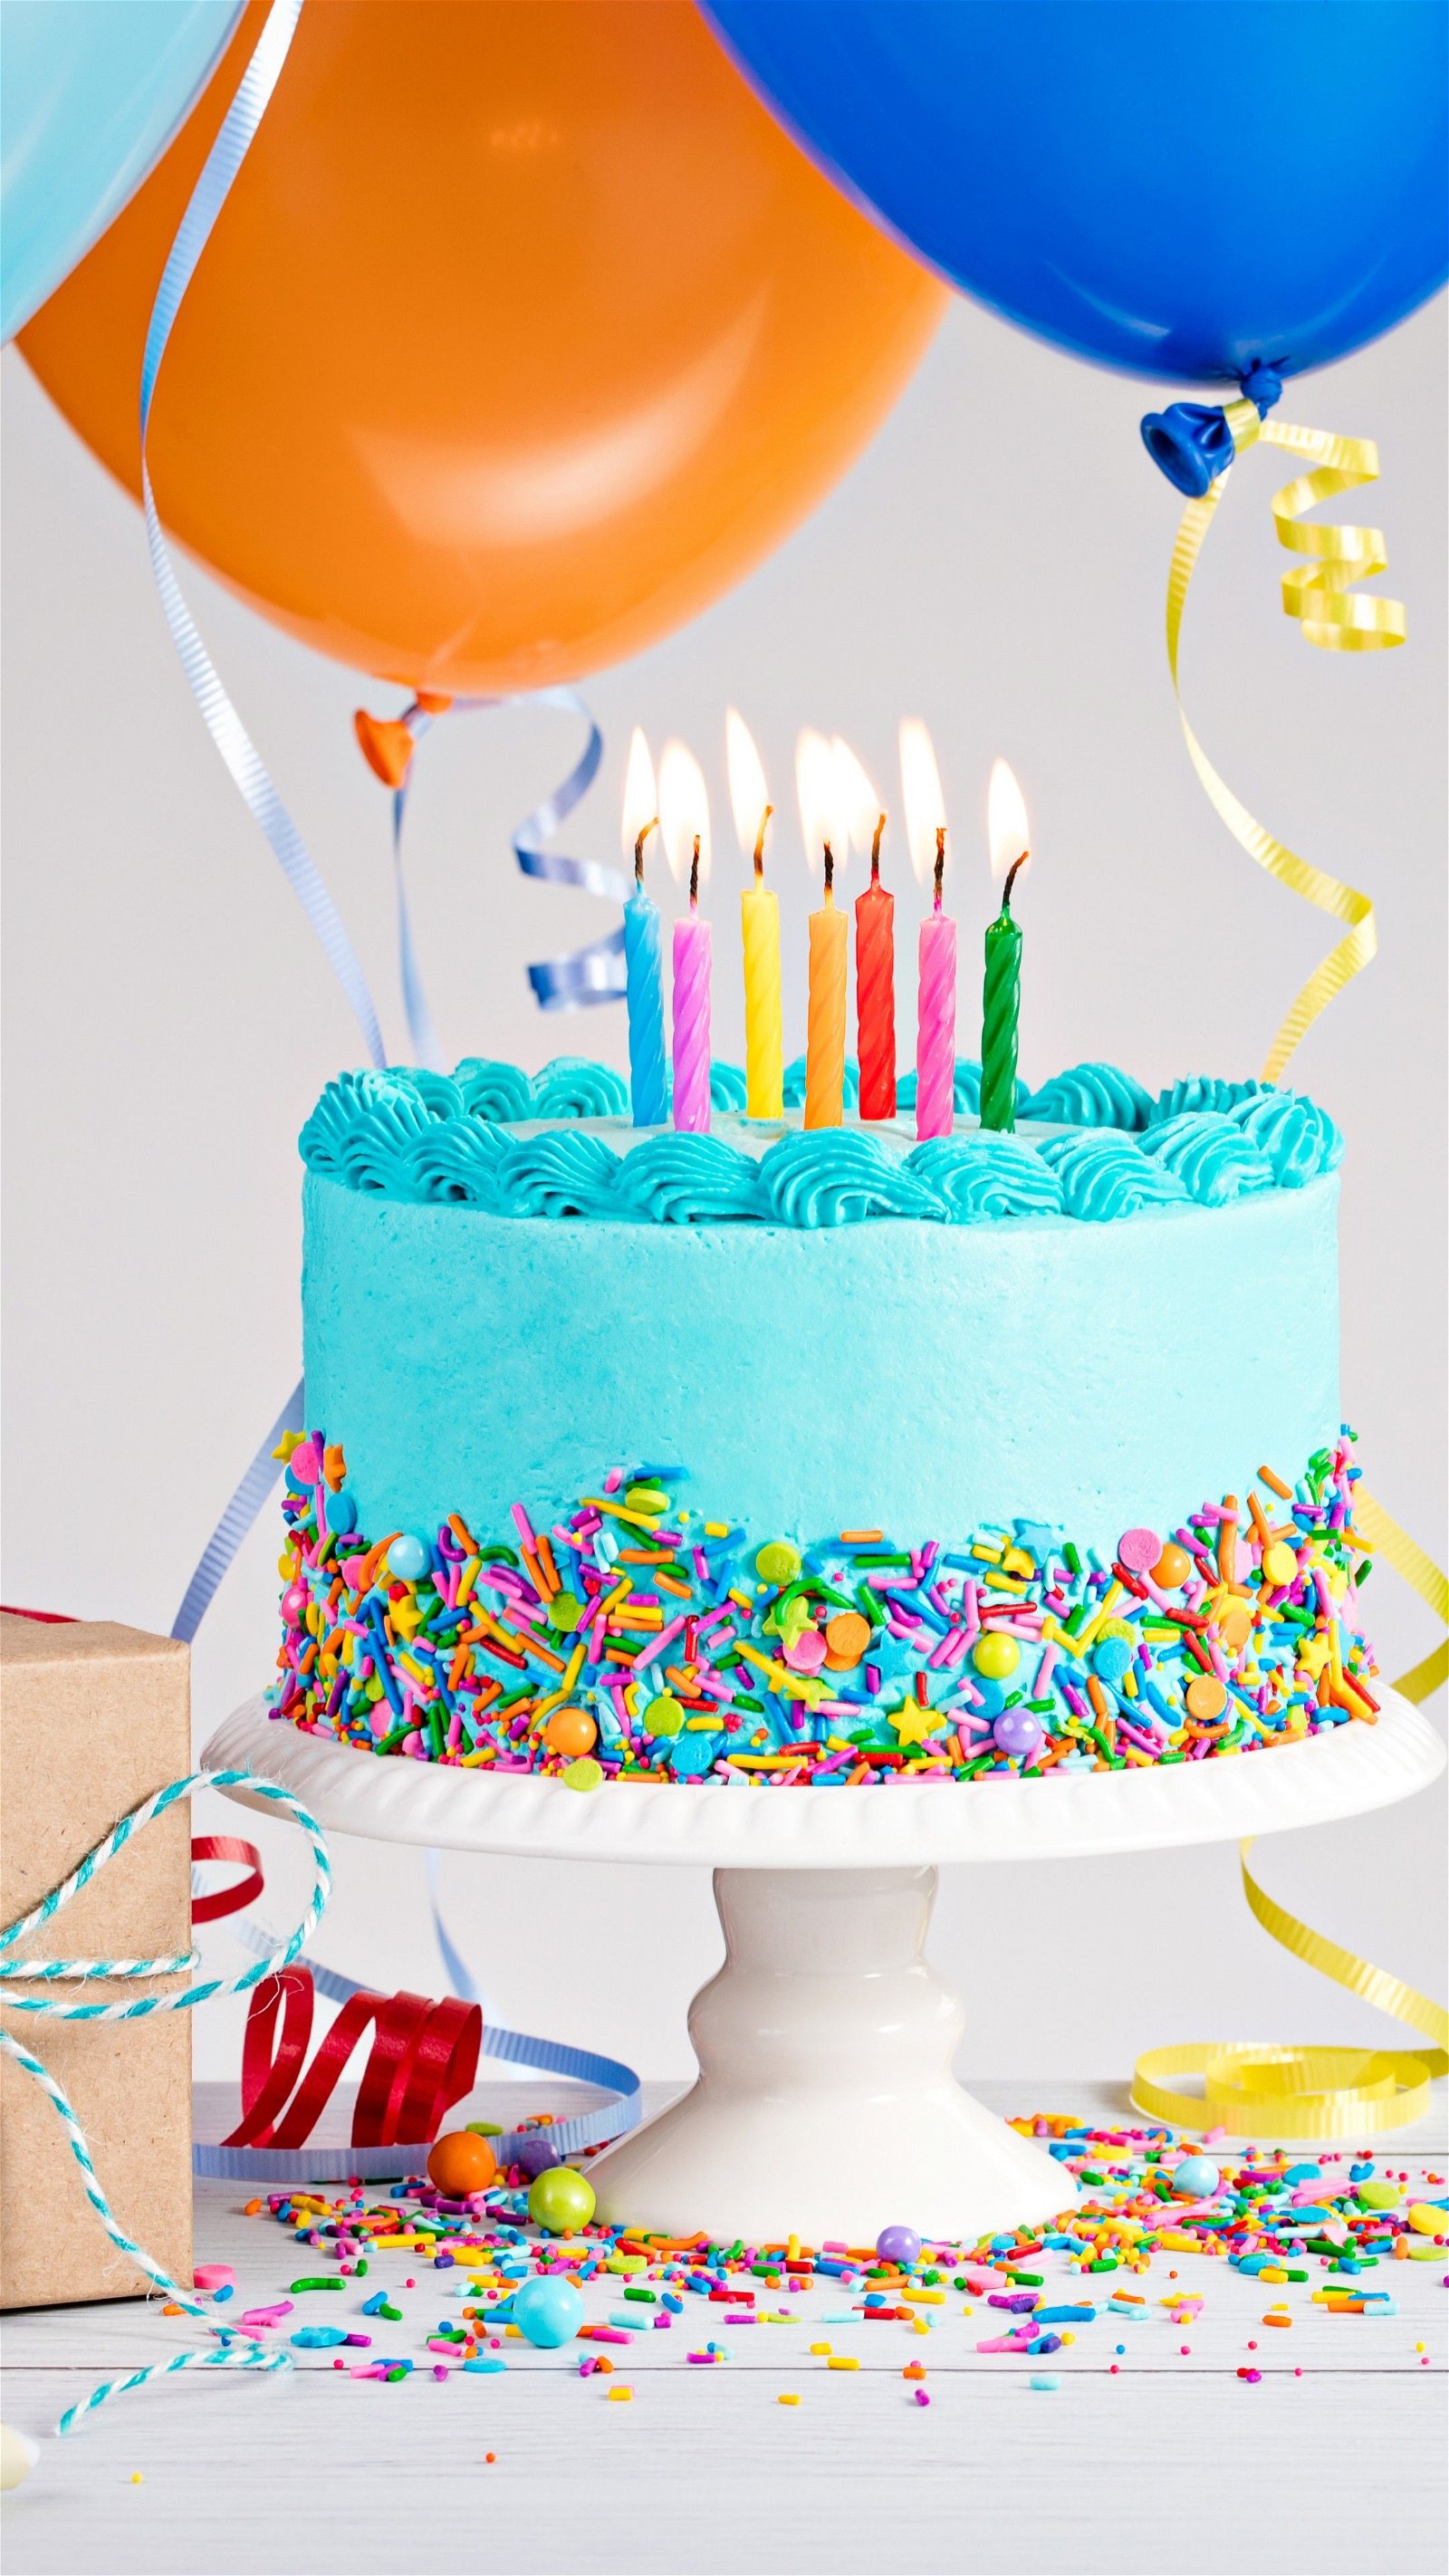 Happy birthday poster background with cake Vector Image